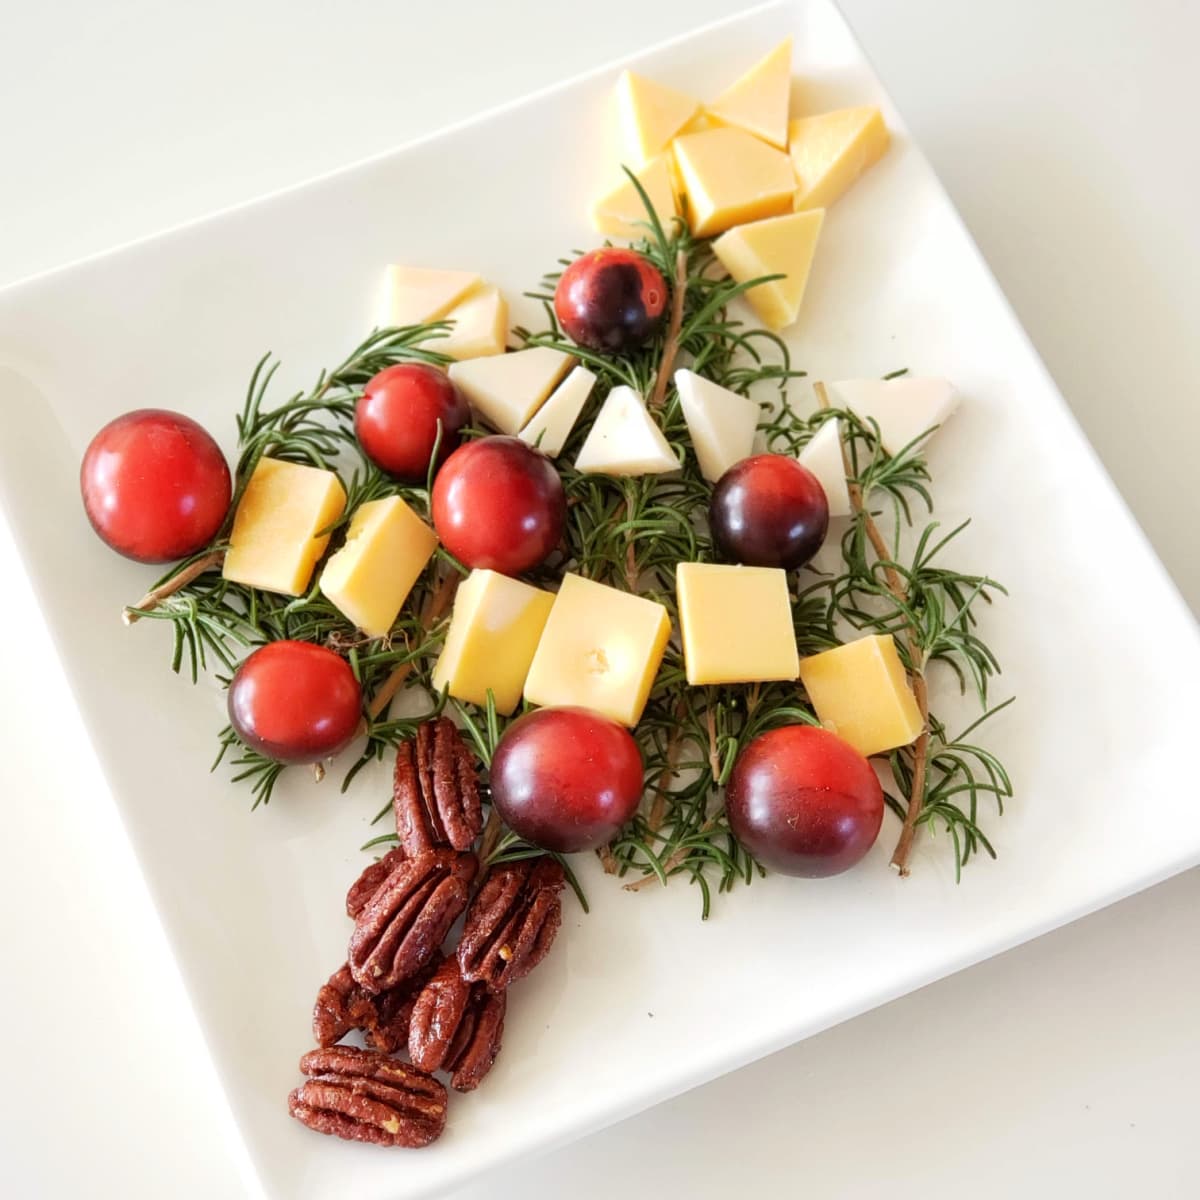 Christmas tree charcuterie plate with rosemary for the leaves and branches and cheese and cherry tomatoes for the ornaments, with Maple Glazed Pecans as the tree trunk